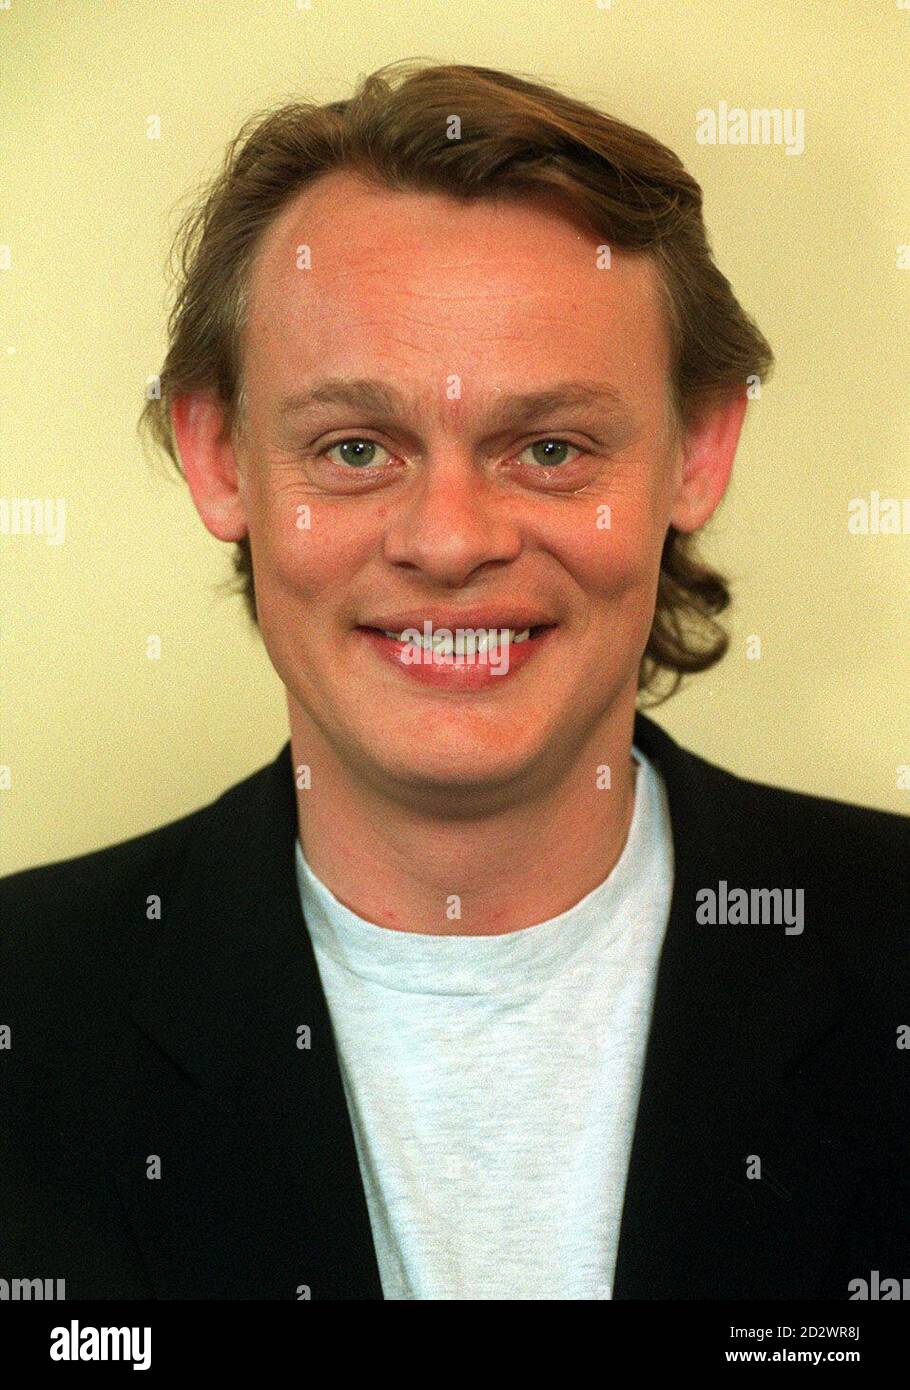 'Men Behaving Badly' actor Martin Clunes at the BBC TV Spring and summer programme launch. 16/10/95: Clunes was charged with drink-driving after being stopped by police in Covent Garden at around 2am.  * R/I: 22/9/00. Stock Photo